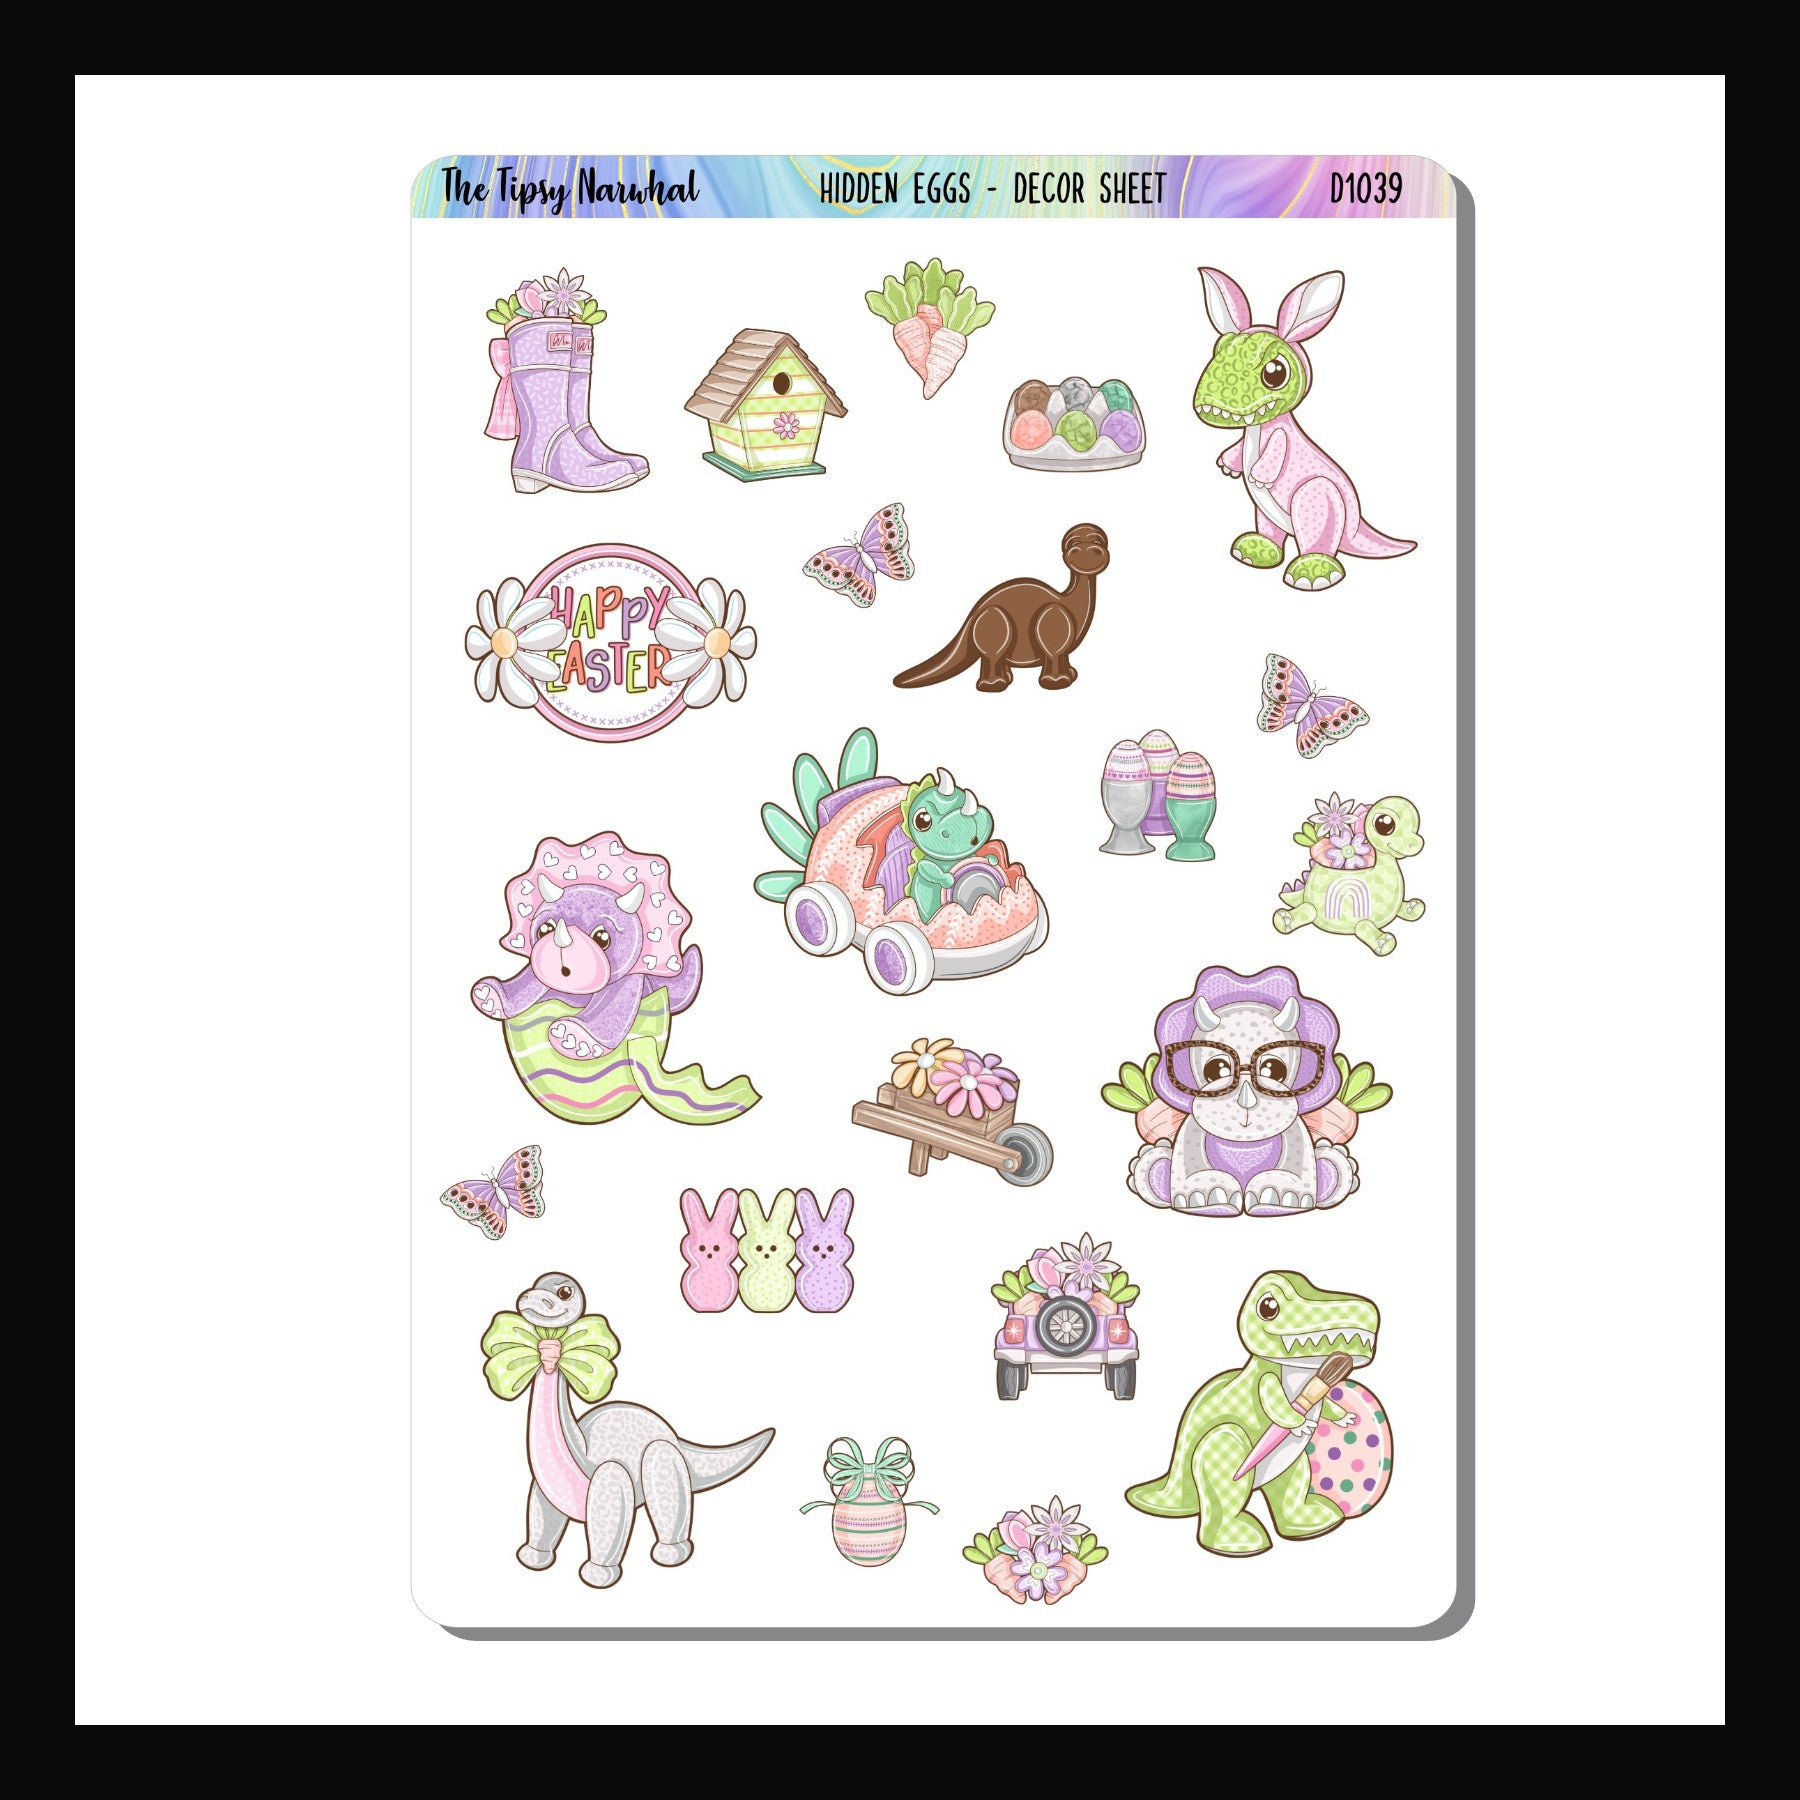 Hidden Eggs Vertical Kit - Decor Sheet Add-on.  The Decor sheet features multiple dinosaur themed Easter stickers, spring stickers such as butterflies and flowers, and a "happy easter" sticker. 